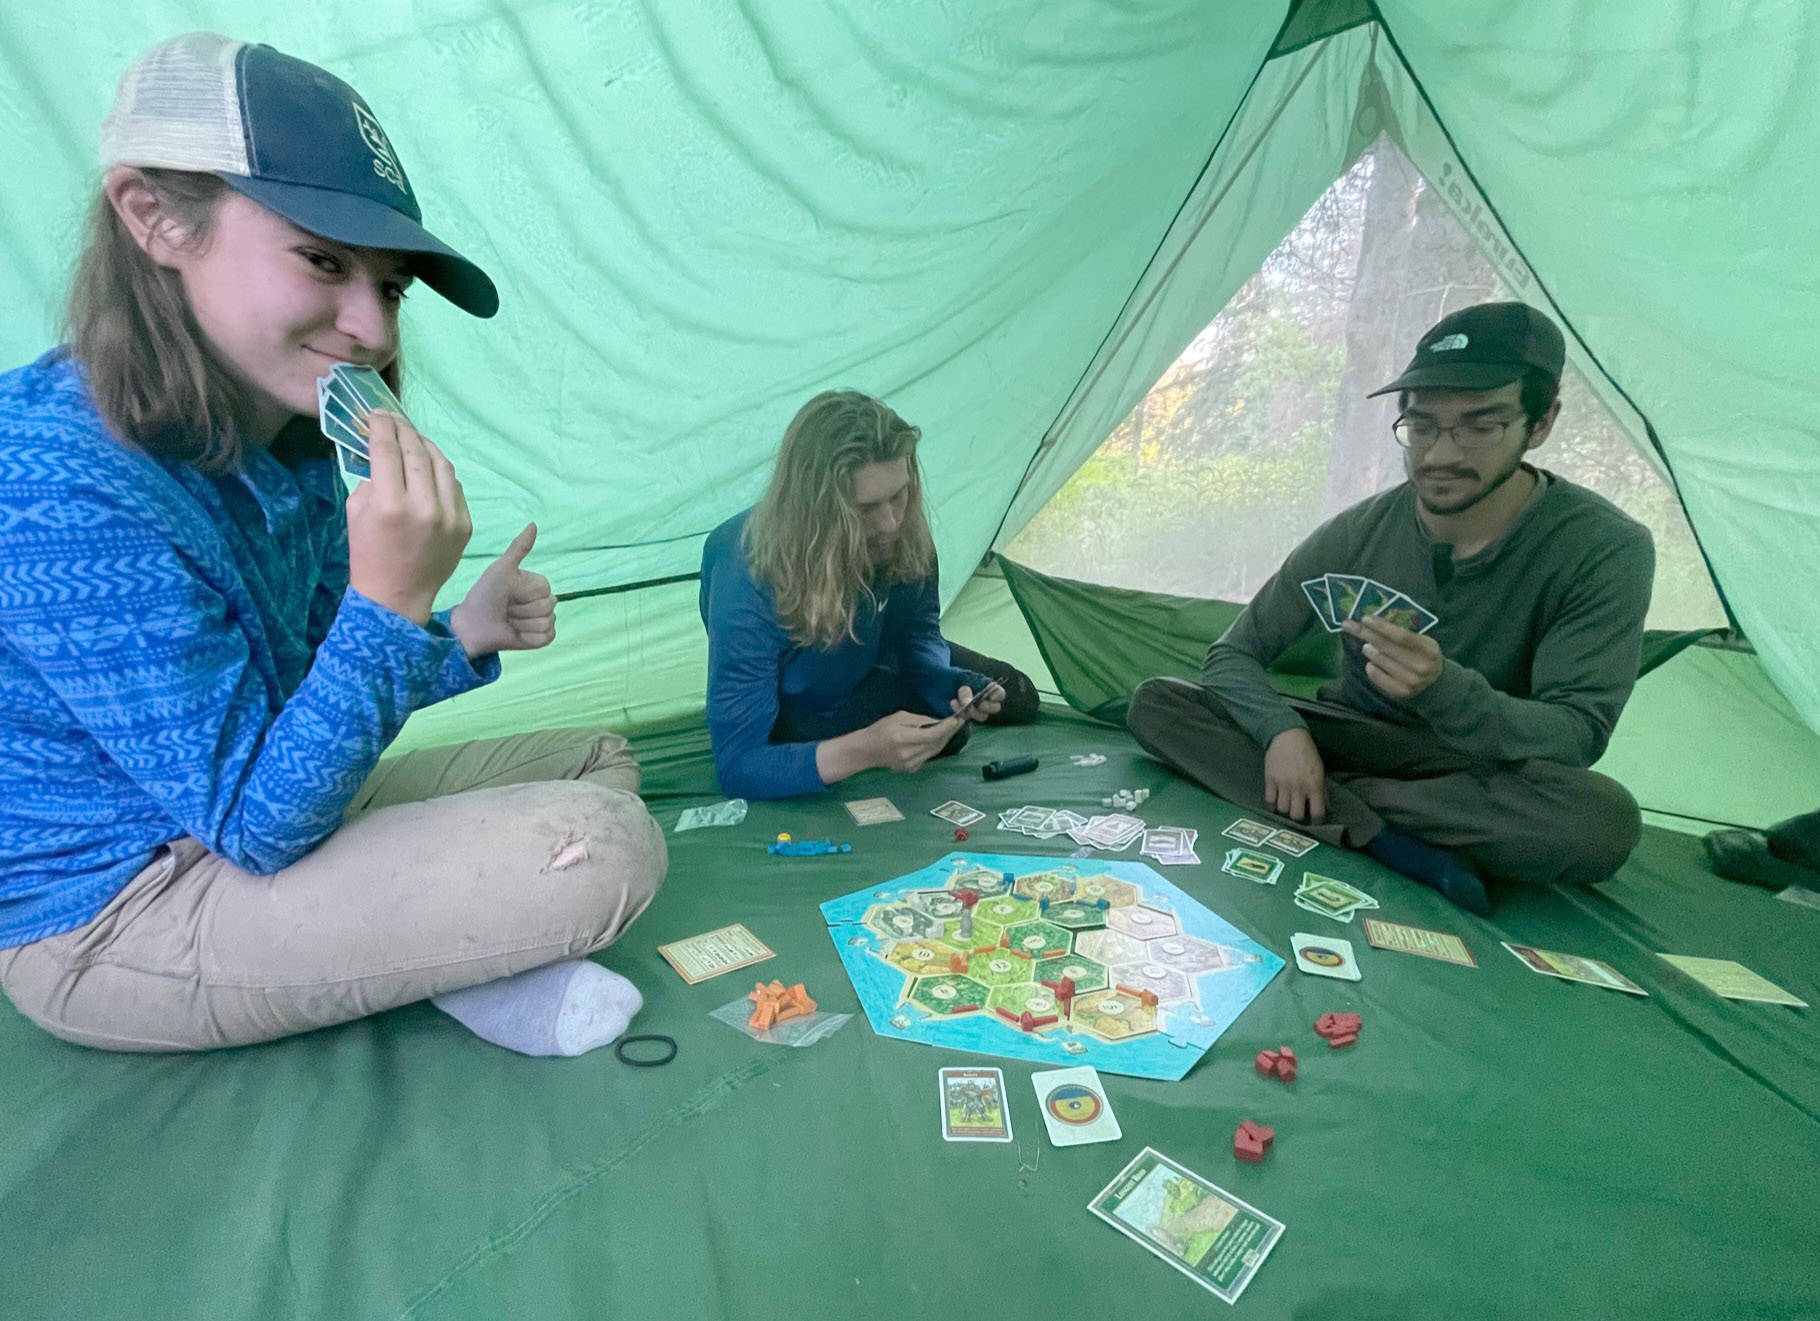 A Student Conservation Association team builds traditions around a game of Catan in a tent by Funny River. (Photo by US Fish and Wildlife Service)